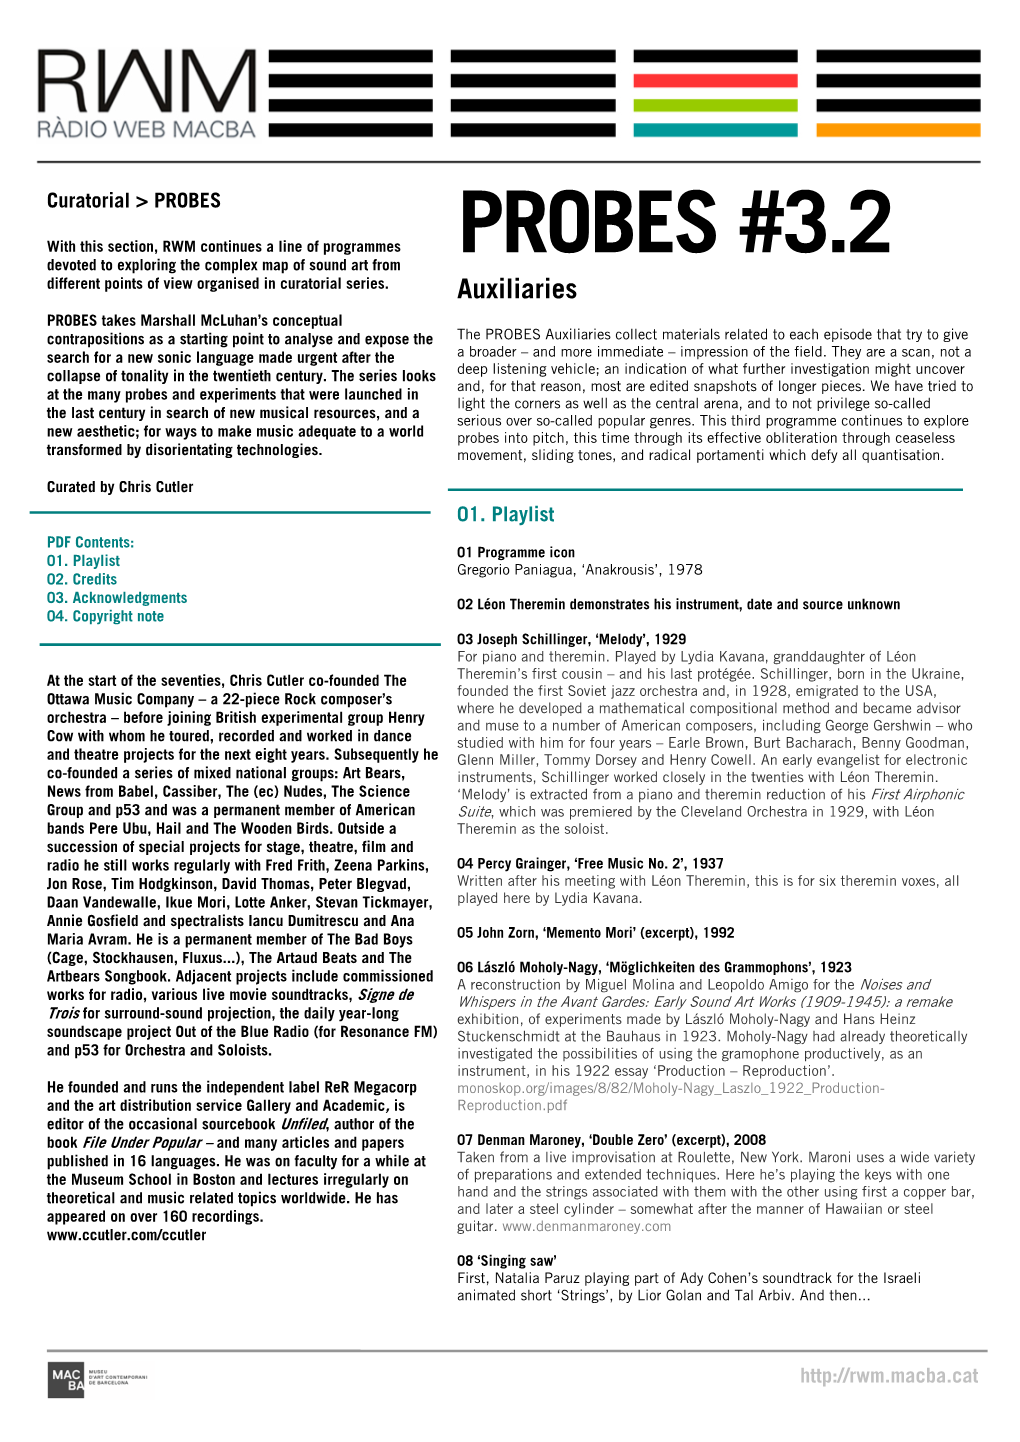 PROBES #3.2 Devoted to Exploring the Complex Map of Sound Art from Different Points of View Organised in Curatorial Series